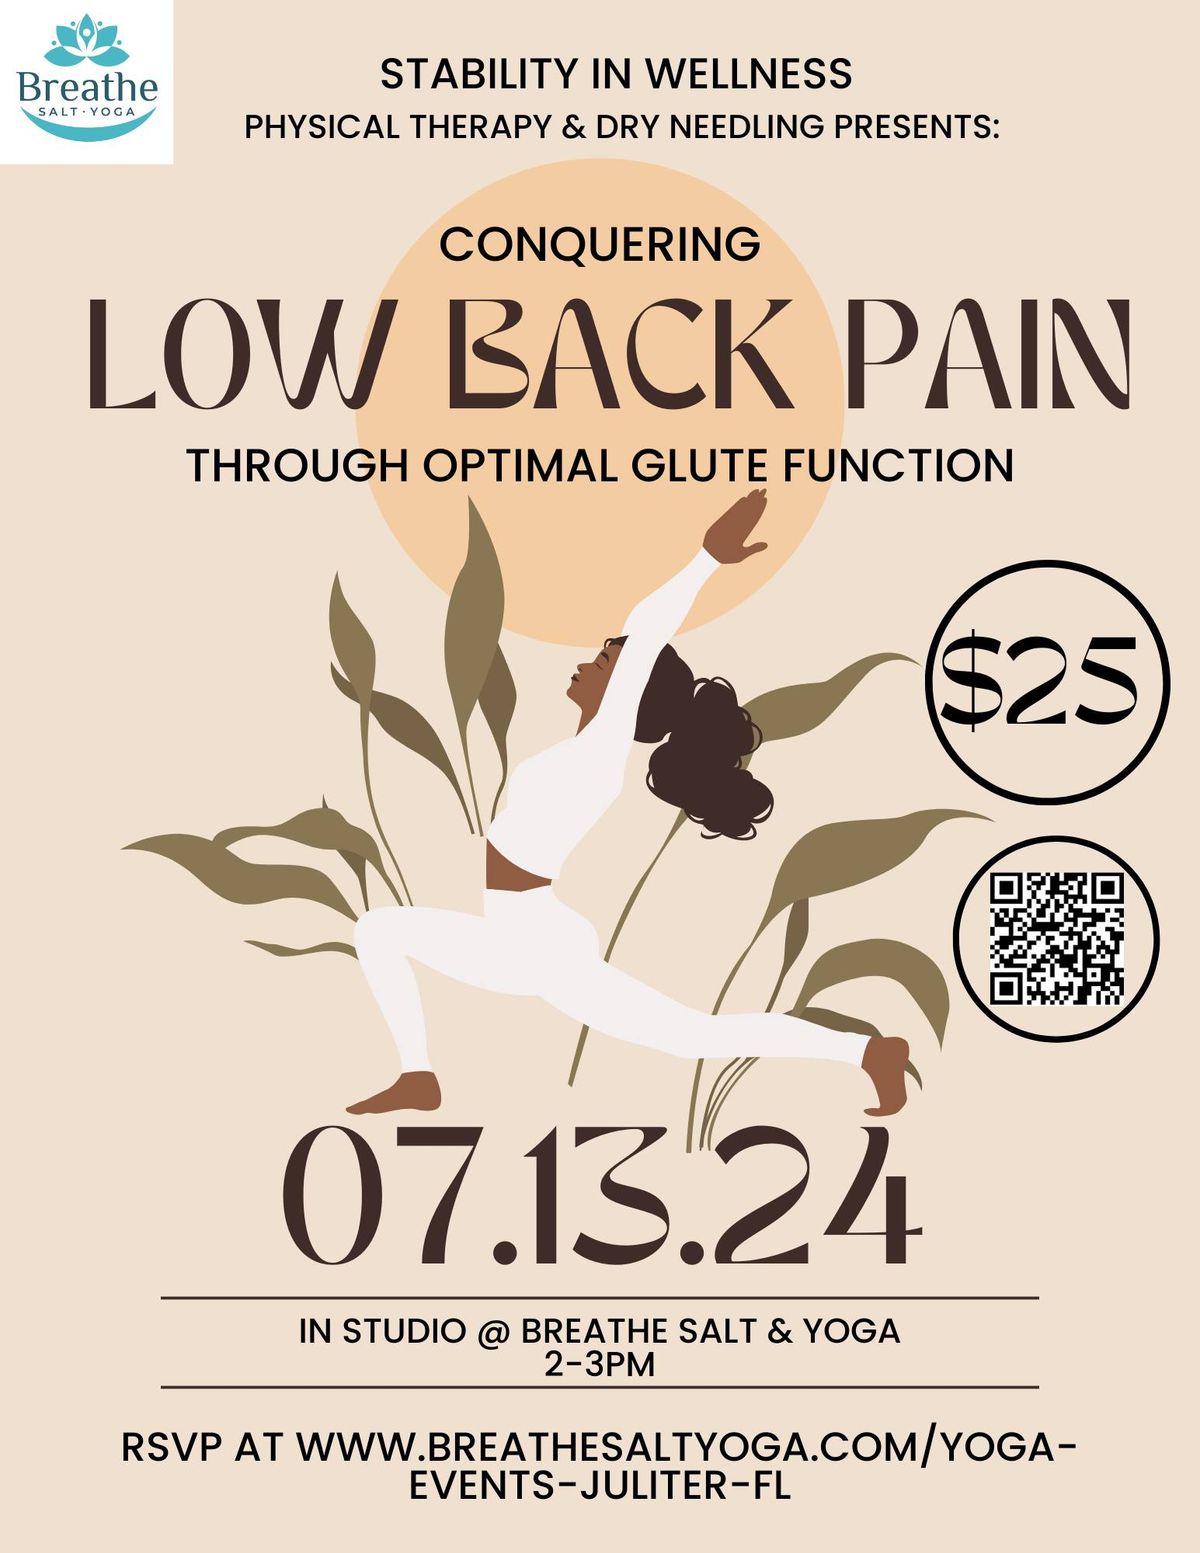 CONQUERING LOW BACK PAIN THROUGH OPTIMAL GLUTE FUNCTION